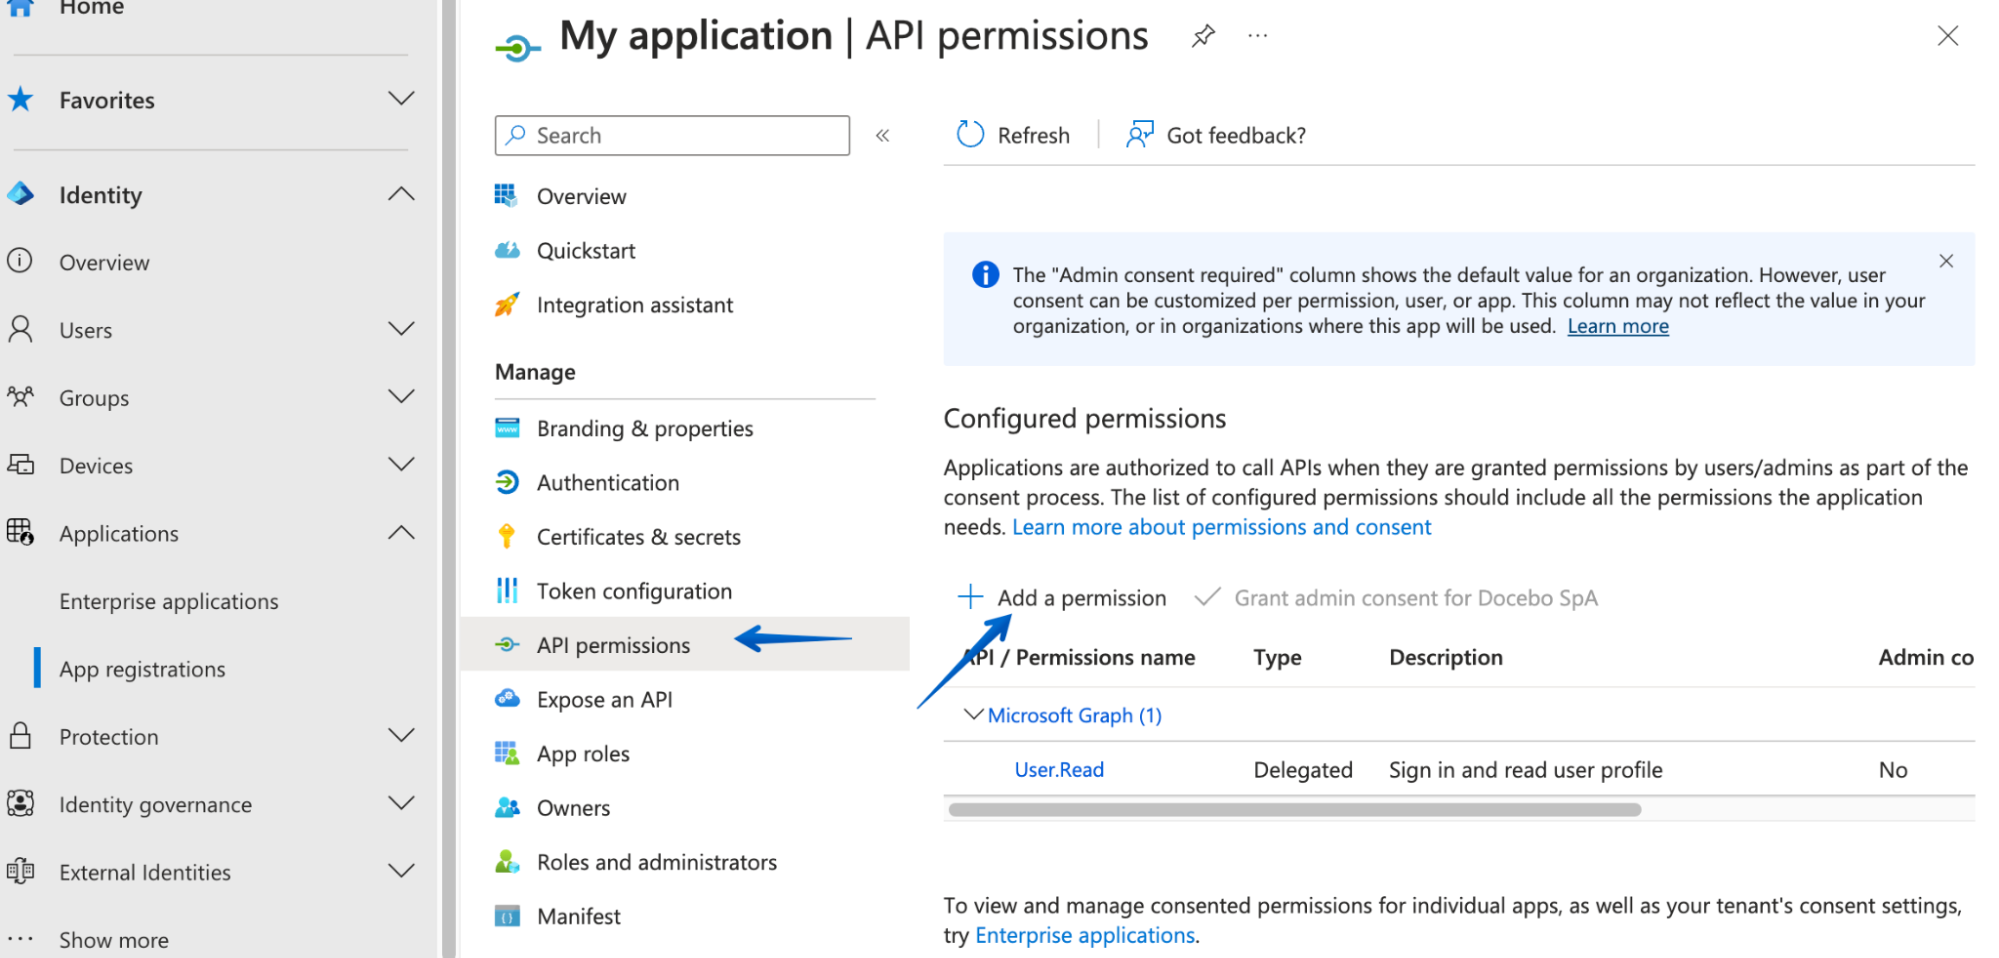 Pressing API permissions in the Manage menu and selecting Add a permission